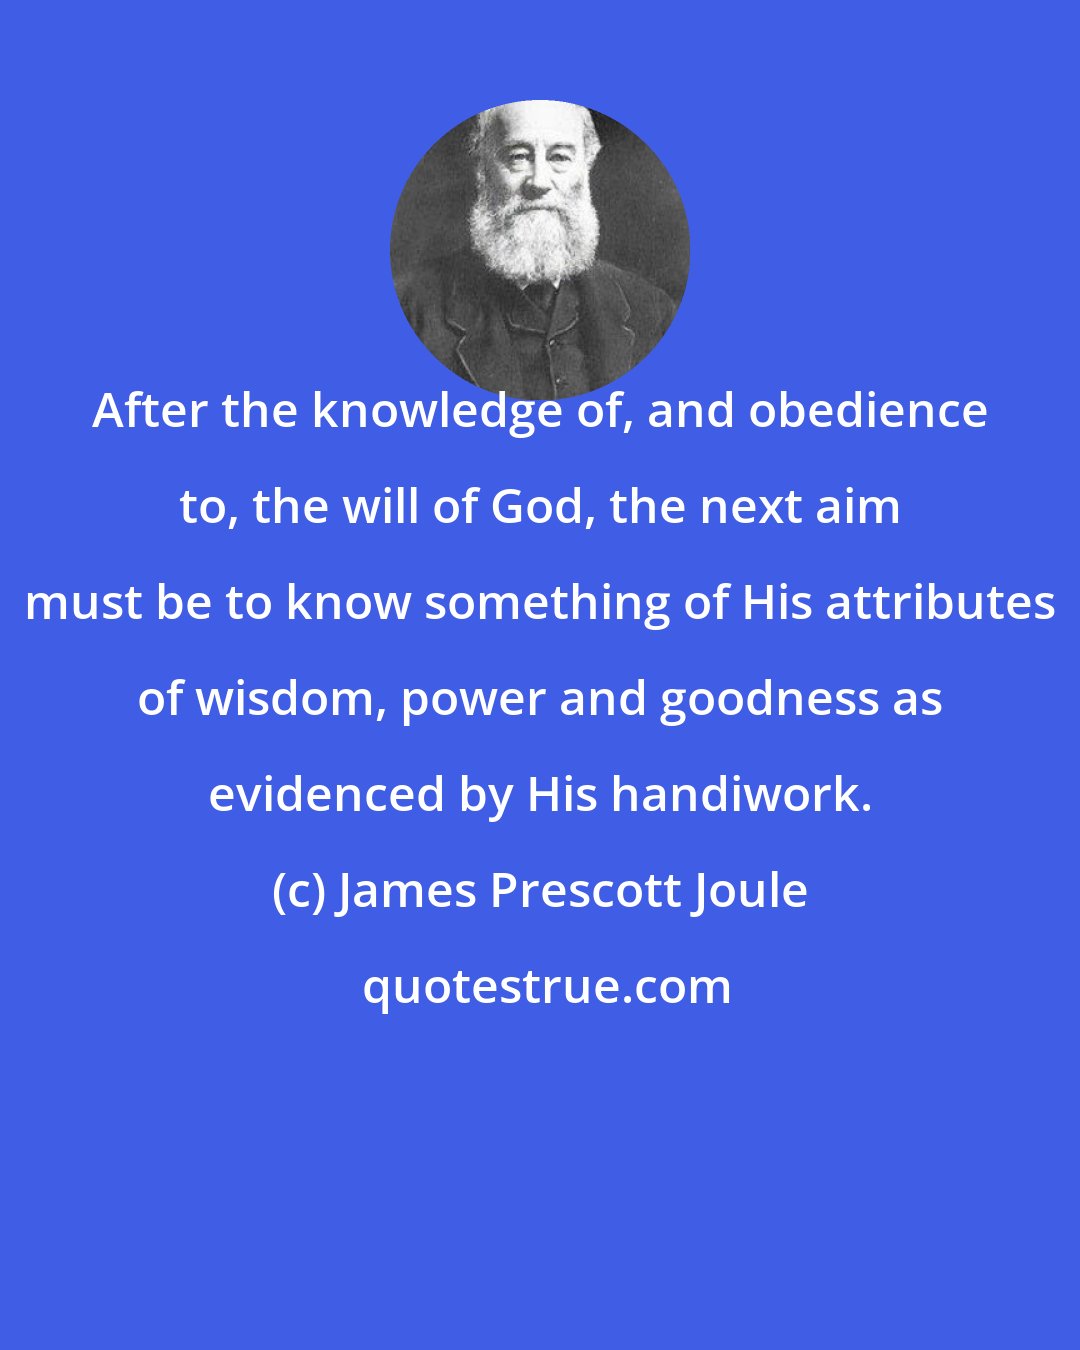 James Prescott Joule: After the knowledge of, and obedience to, the will of God, the next aim must be to know something of His attributes of wisdom, power and goodness as evidenced by His handiwork.